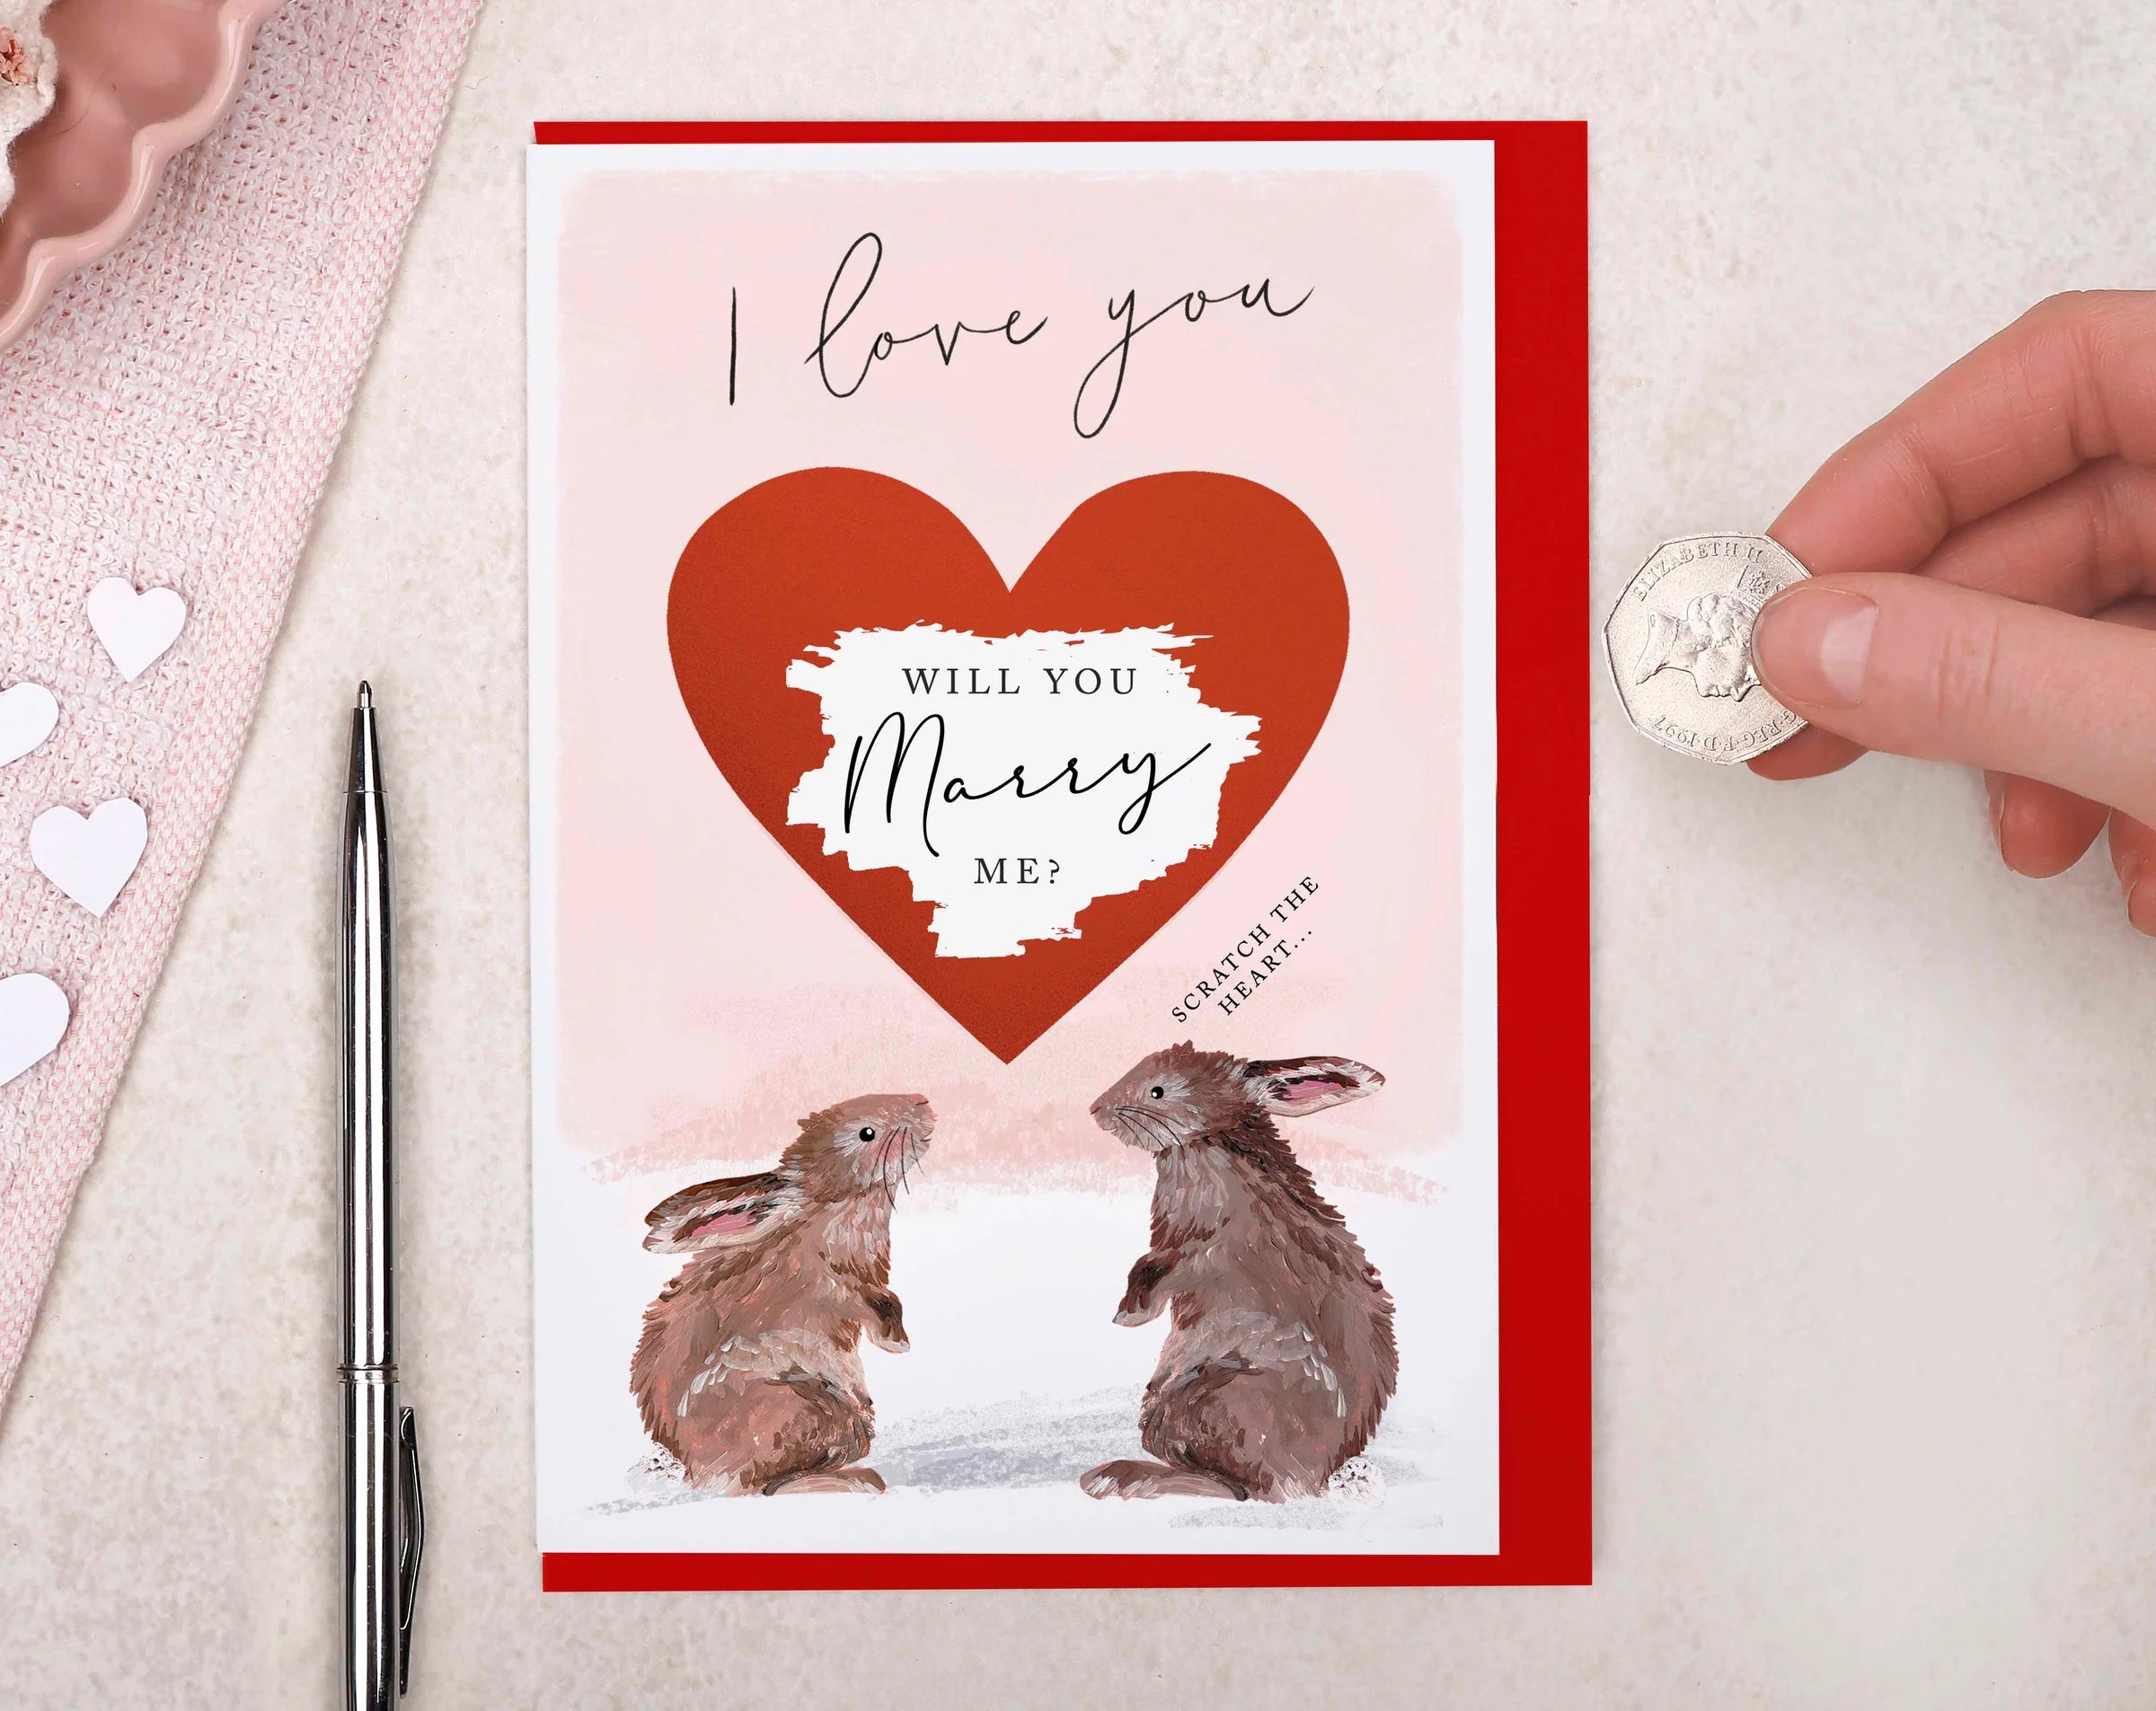 scratch to reveal will you marry me proposal card